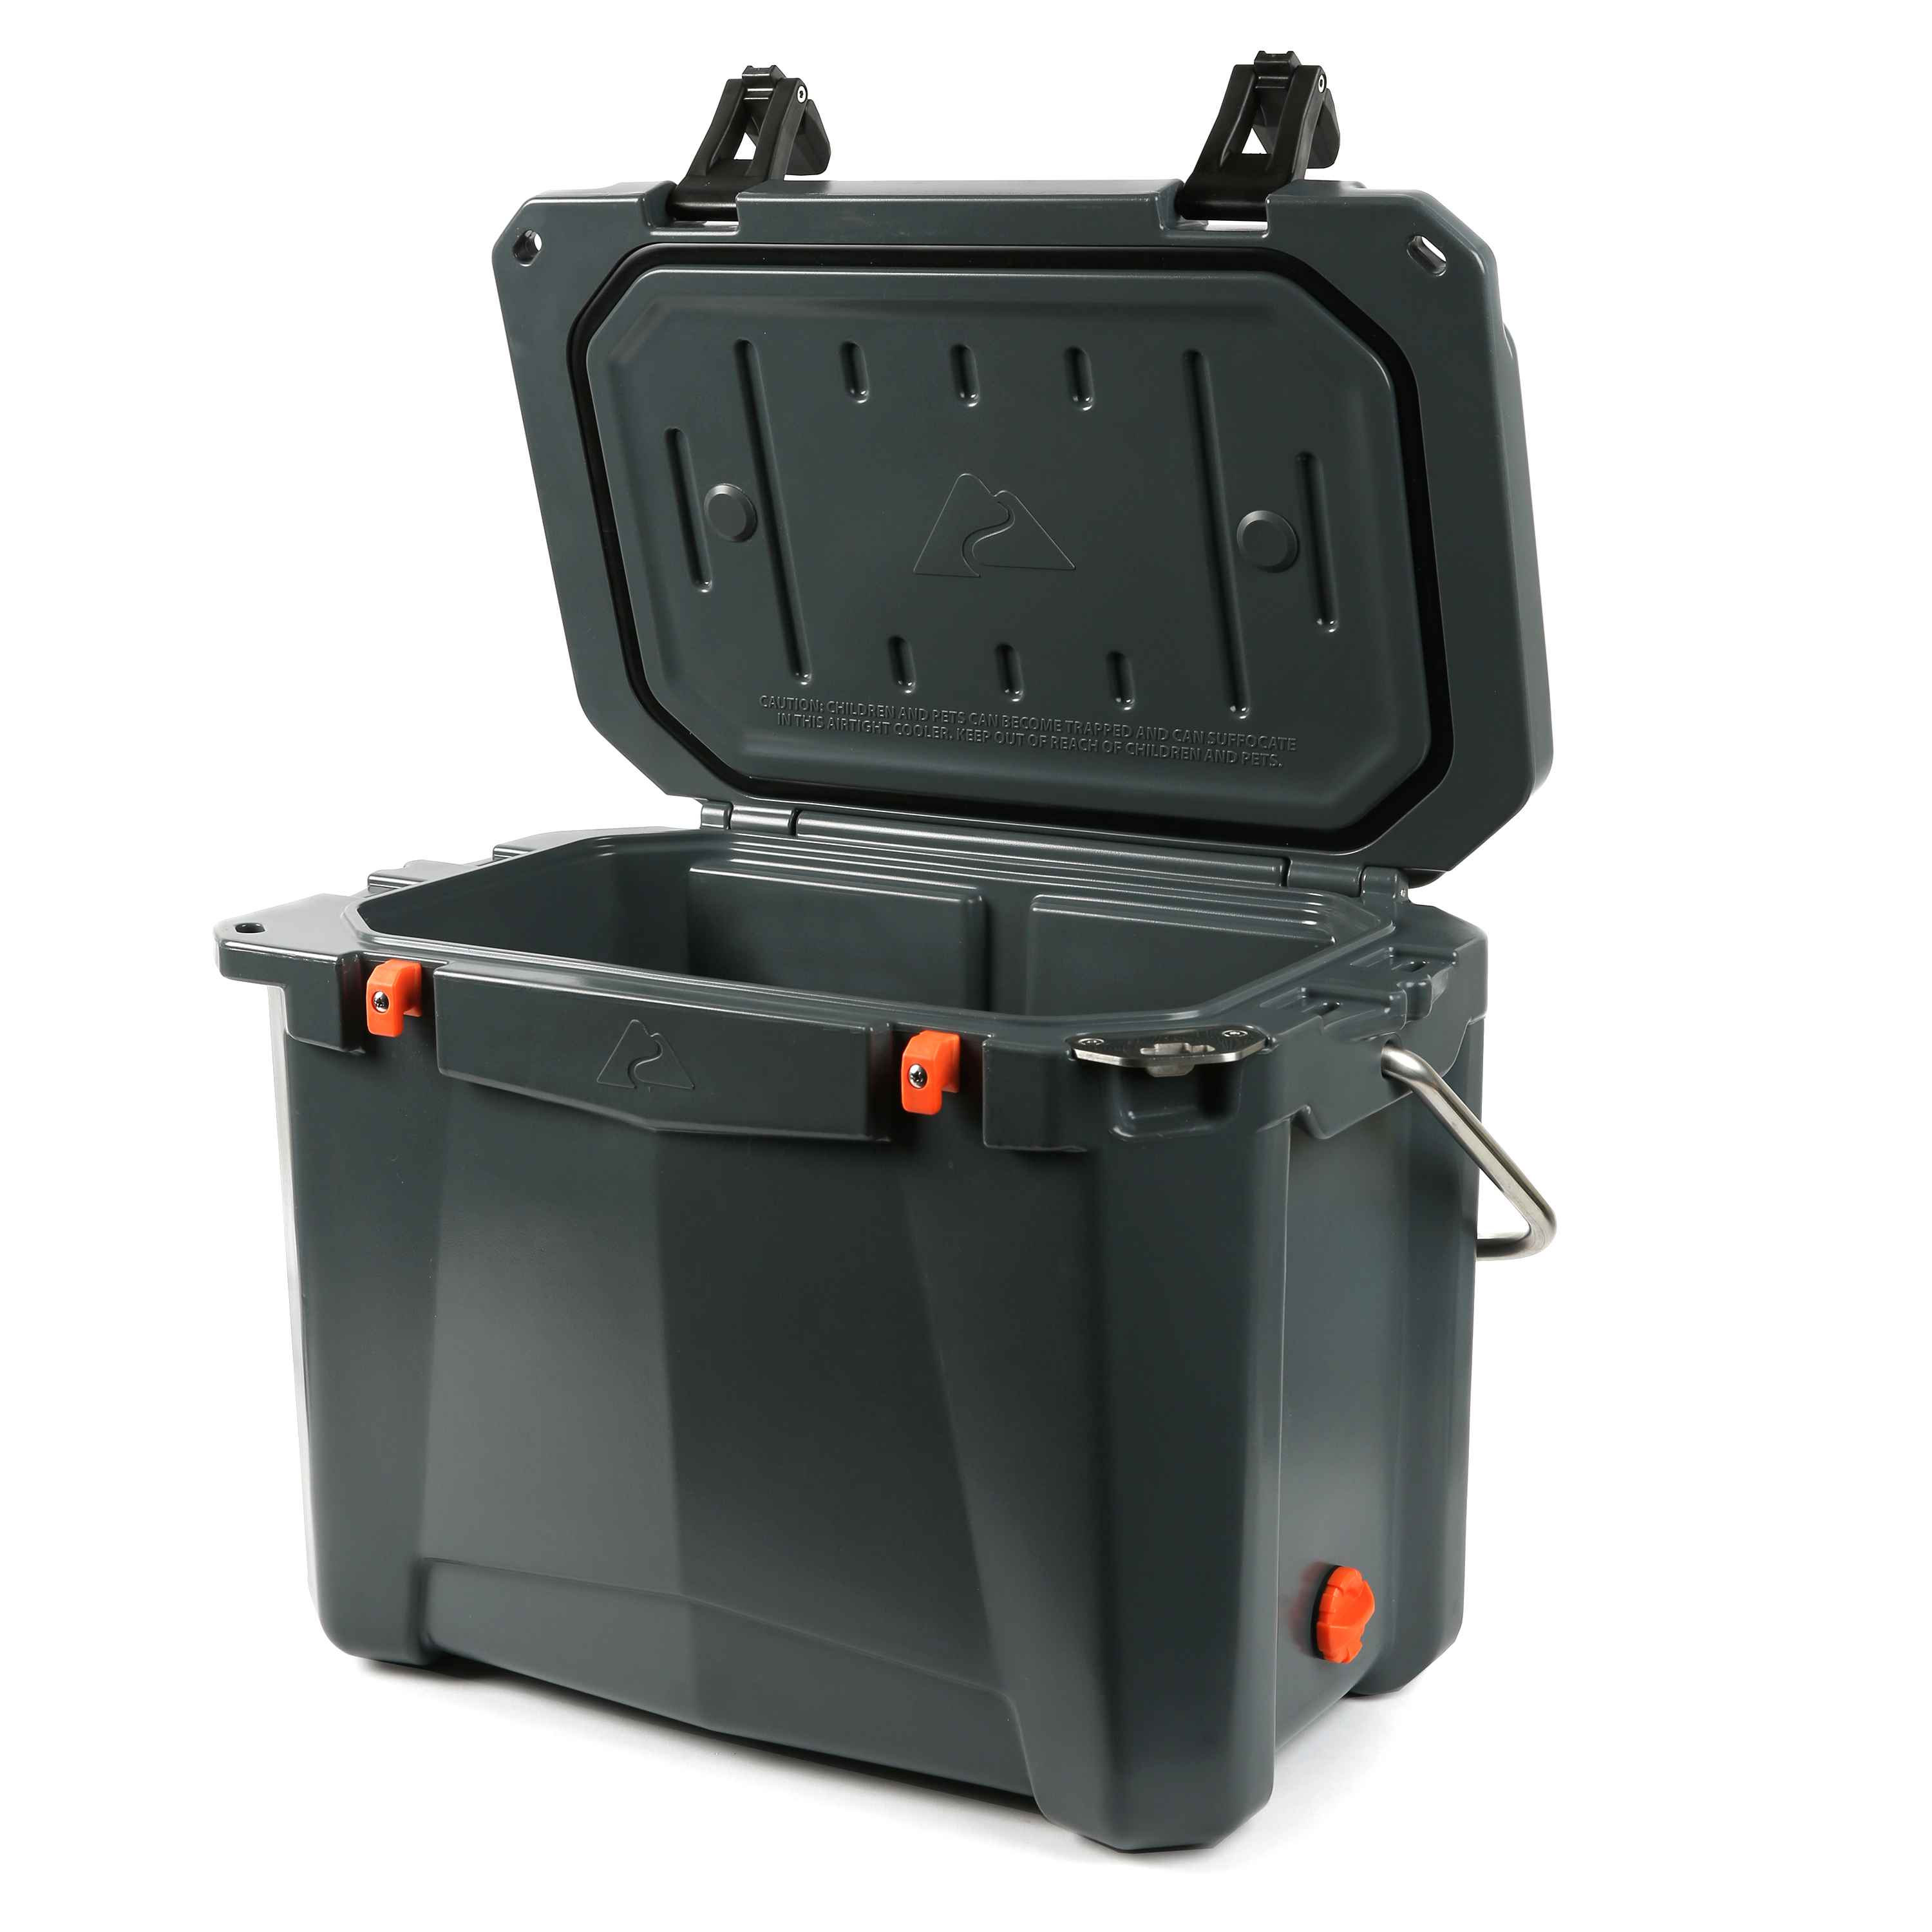 Ozark Trail 26 Quart High Performance Roto-Molded Cooler with Microban®, Gray - image 3 of 12